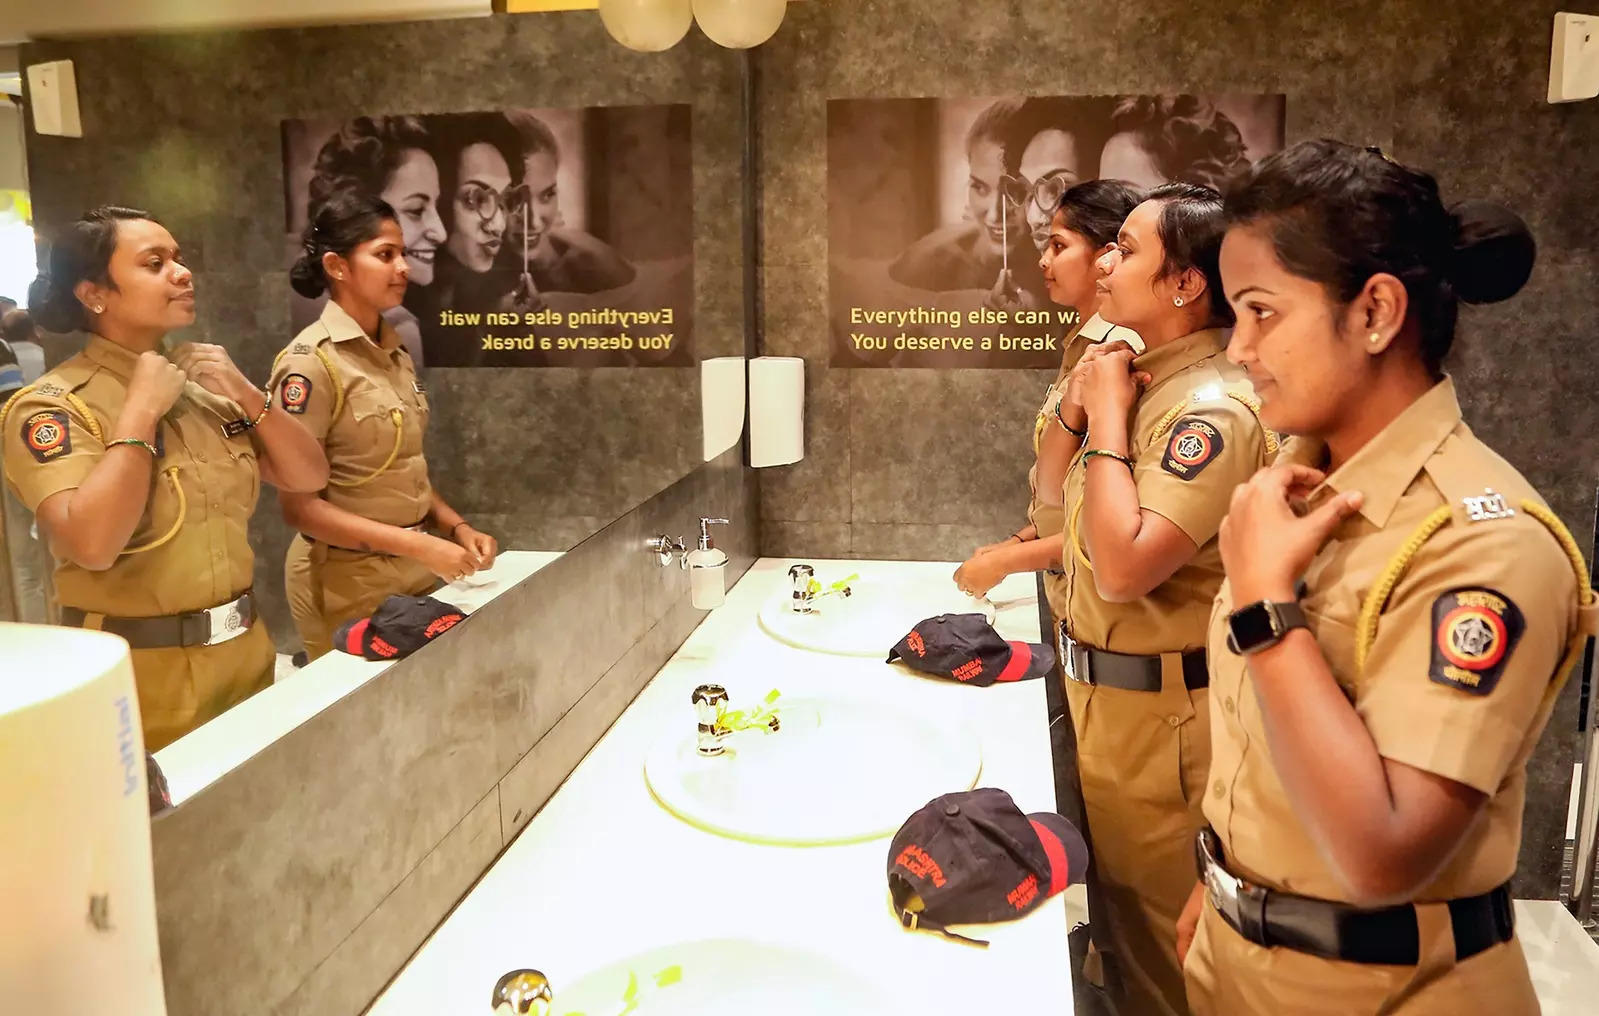 Mumbai: Women police personnel to now have 8-hour shift as International Women’s Day gift